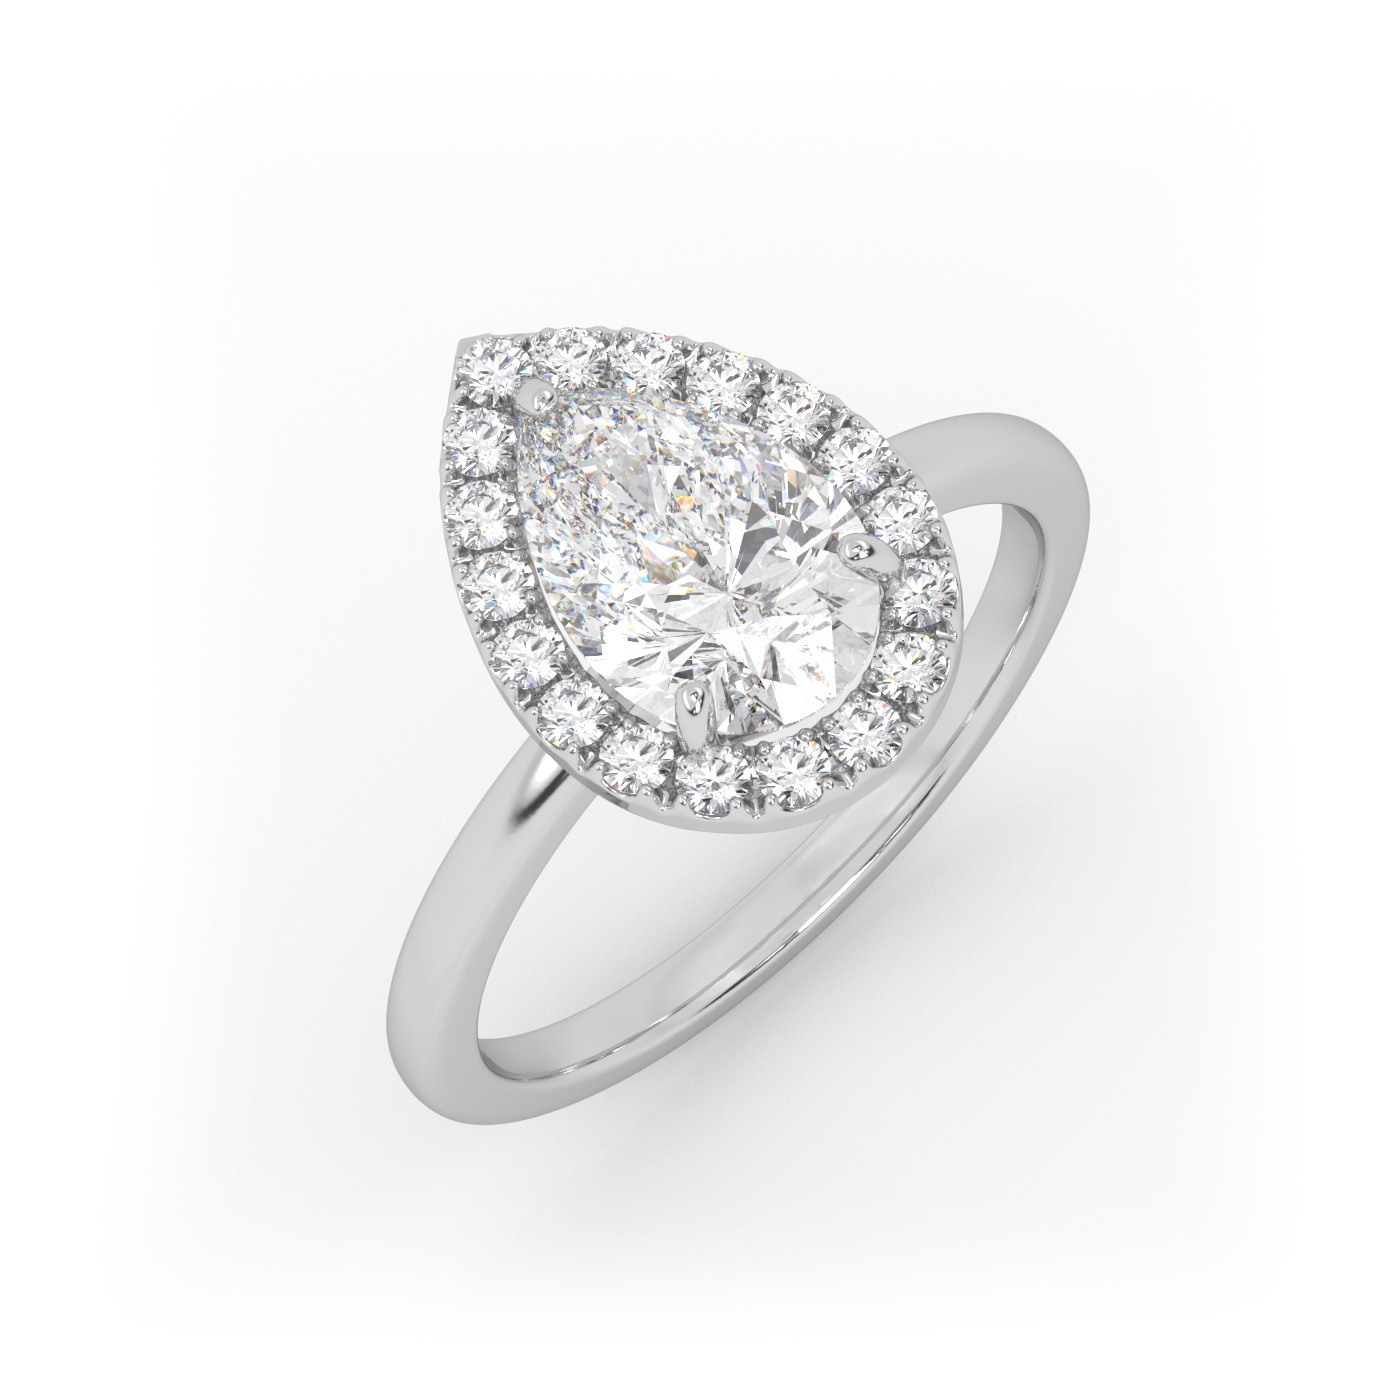 18K WHITE GOLD Pear Diamond Cut Engagement Ring with Halo Style